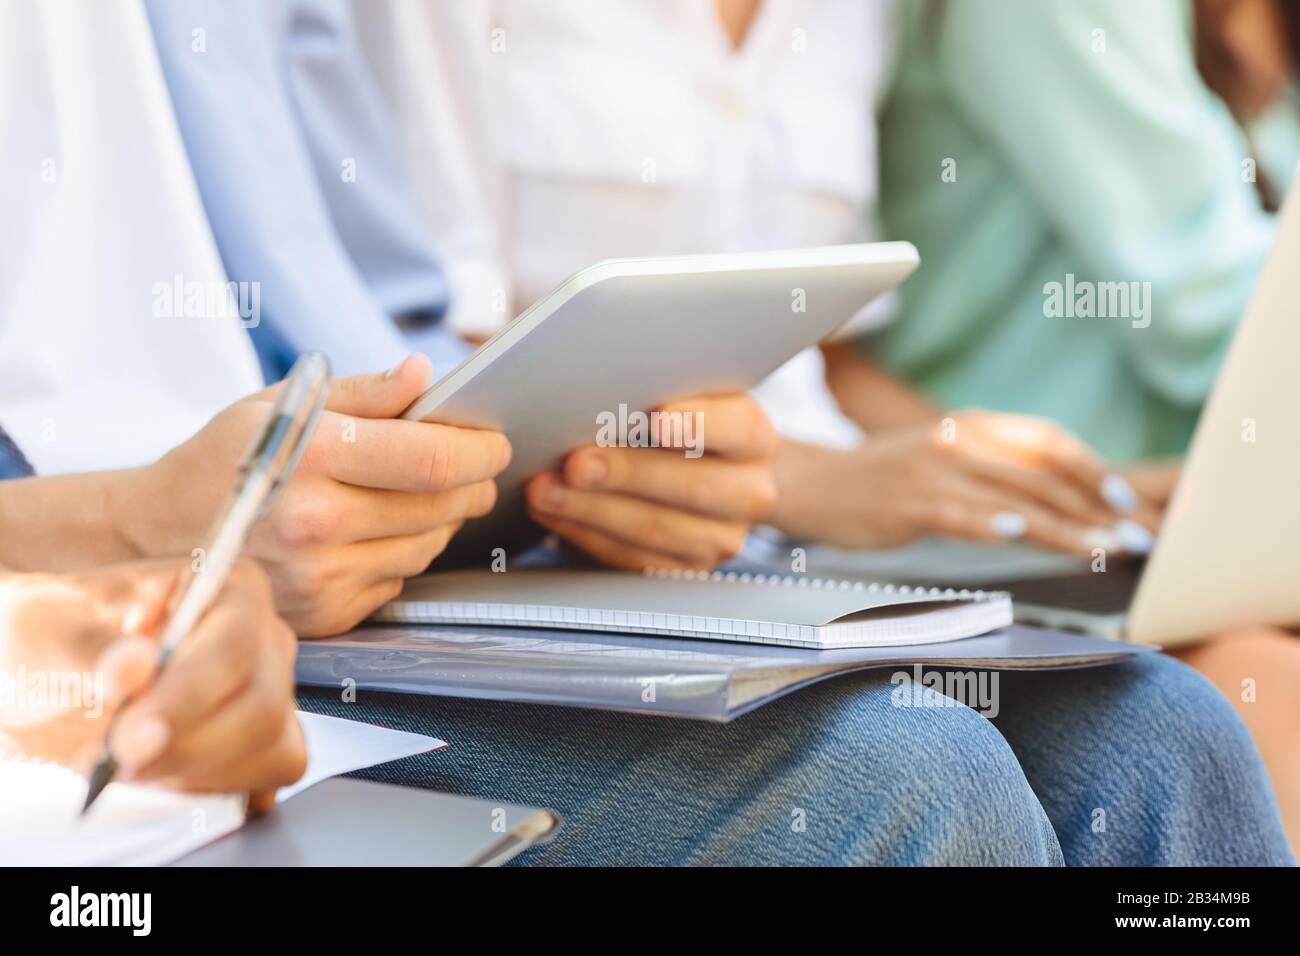 Unrecognizable Male Student Using Digital Tablet Outdoors, Preparring For Classes, Closeup Stock Photo